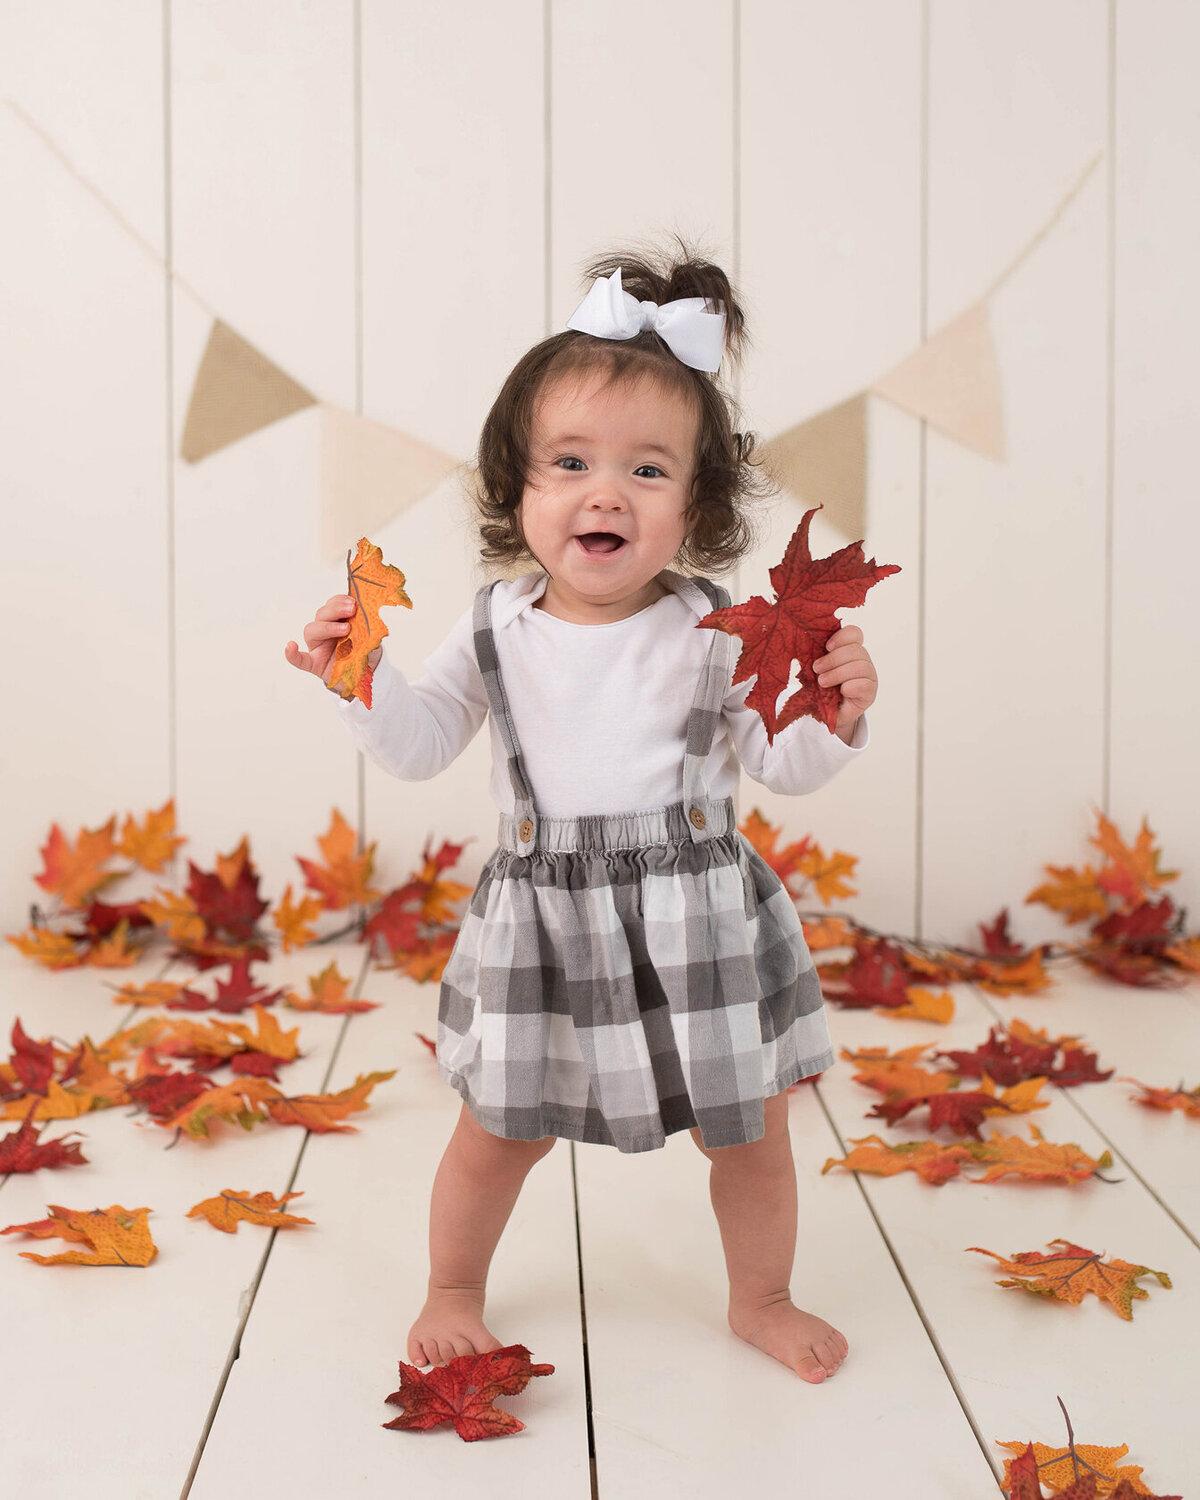 Baby photo in autumn leaves by Laura King, Houston Photographer